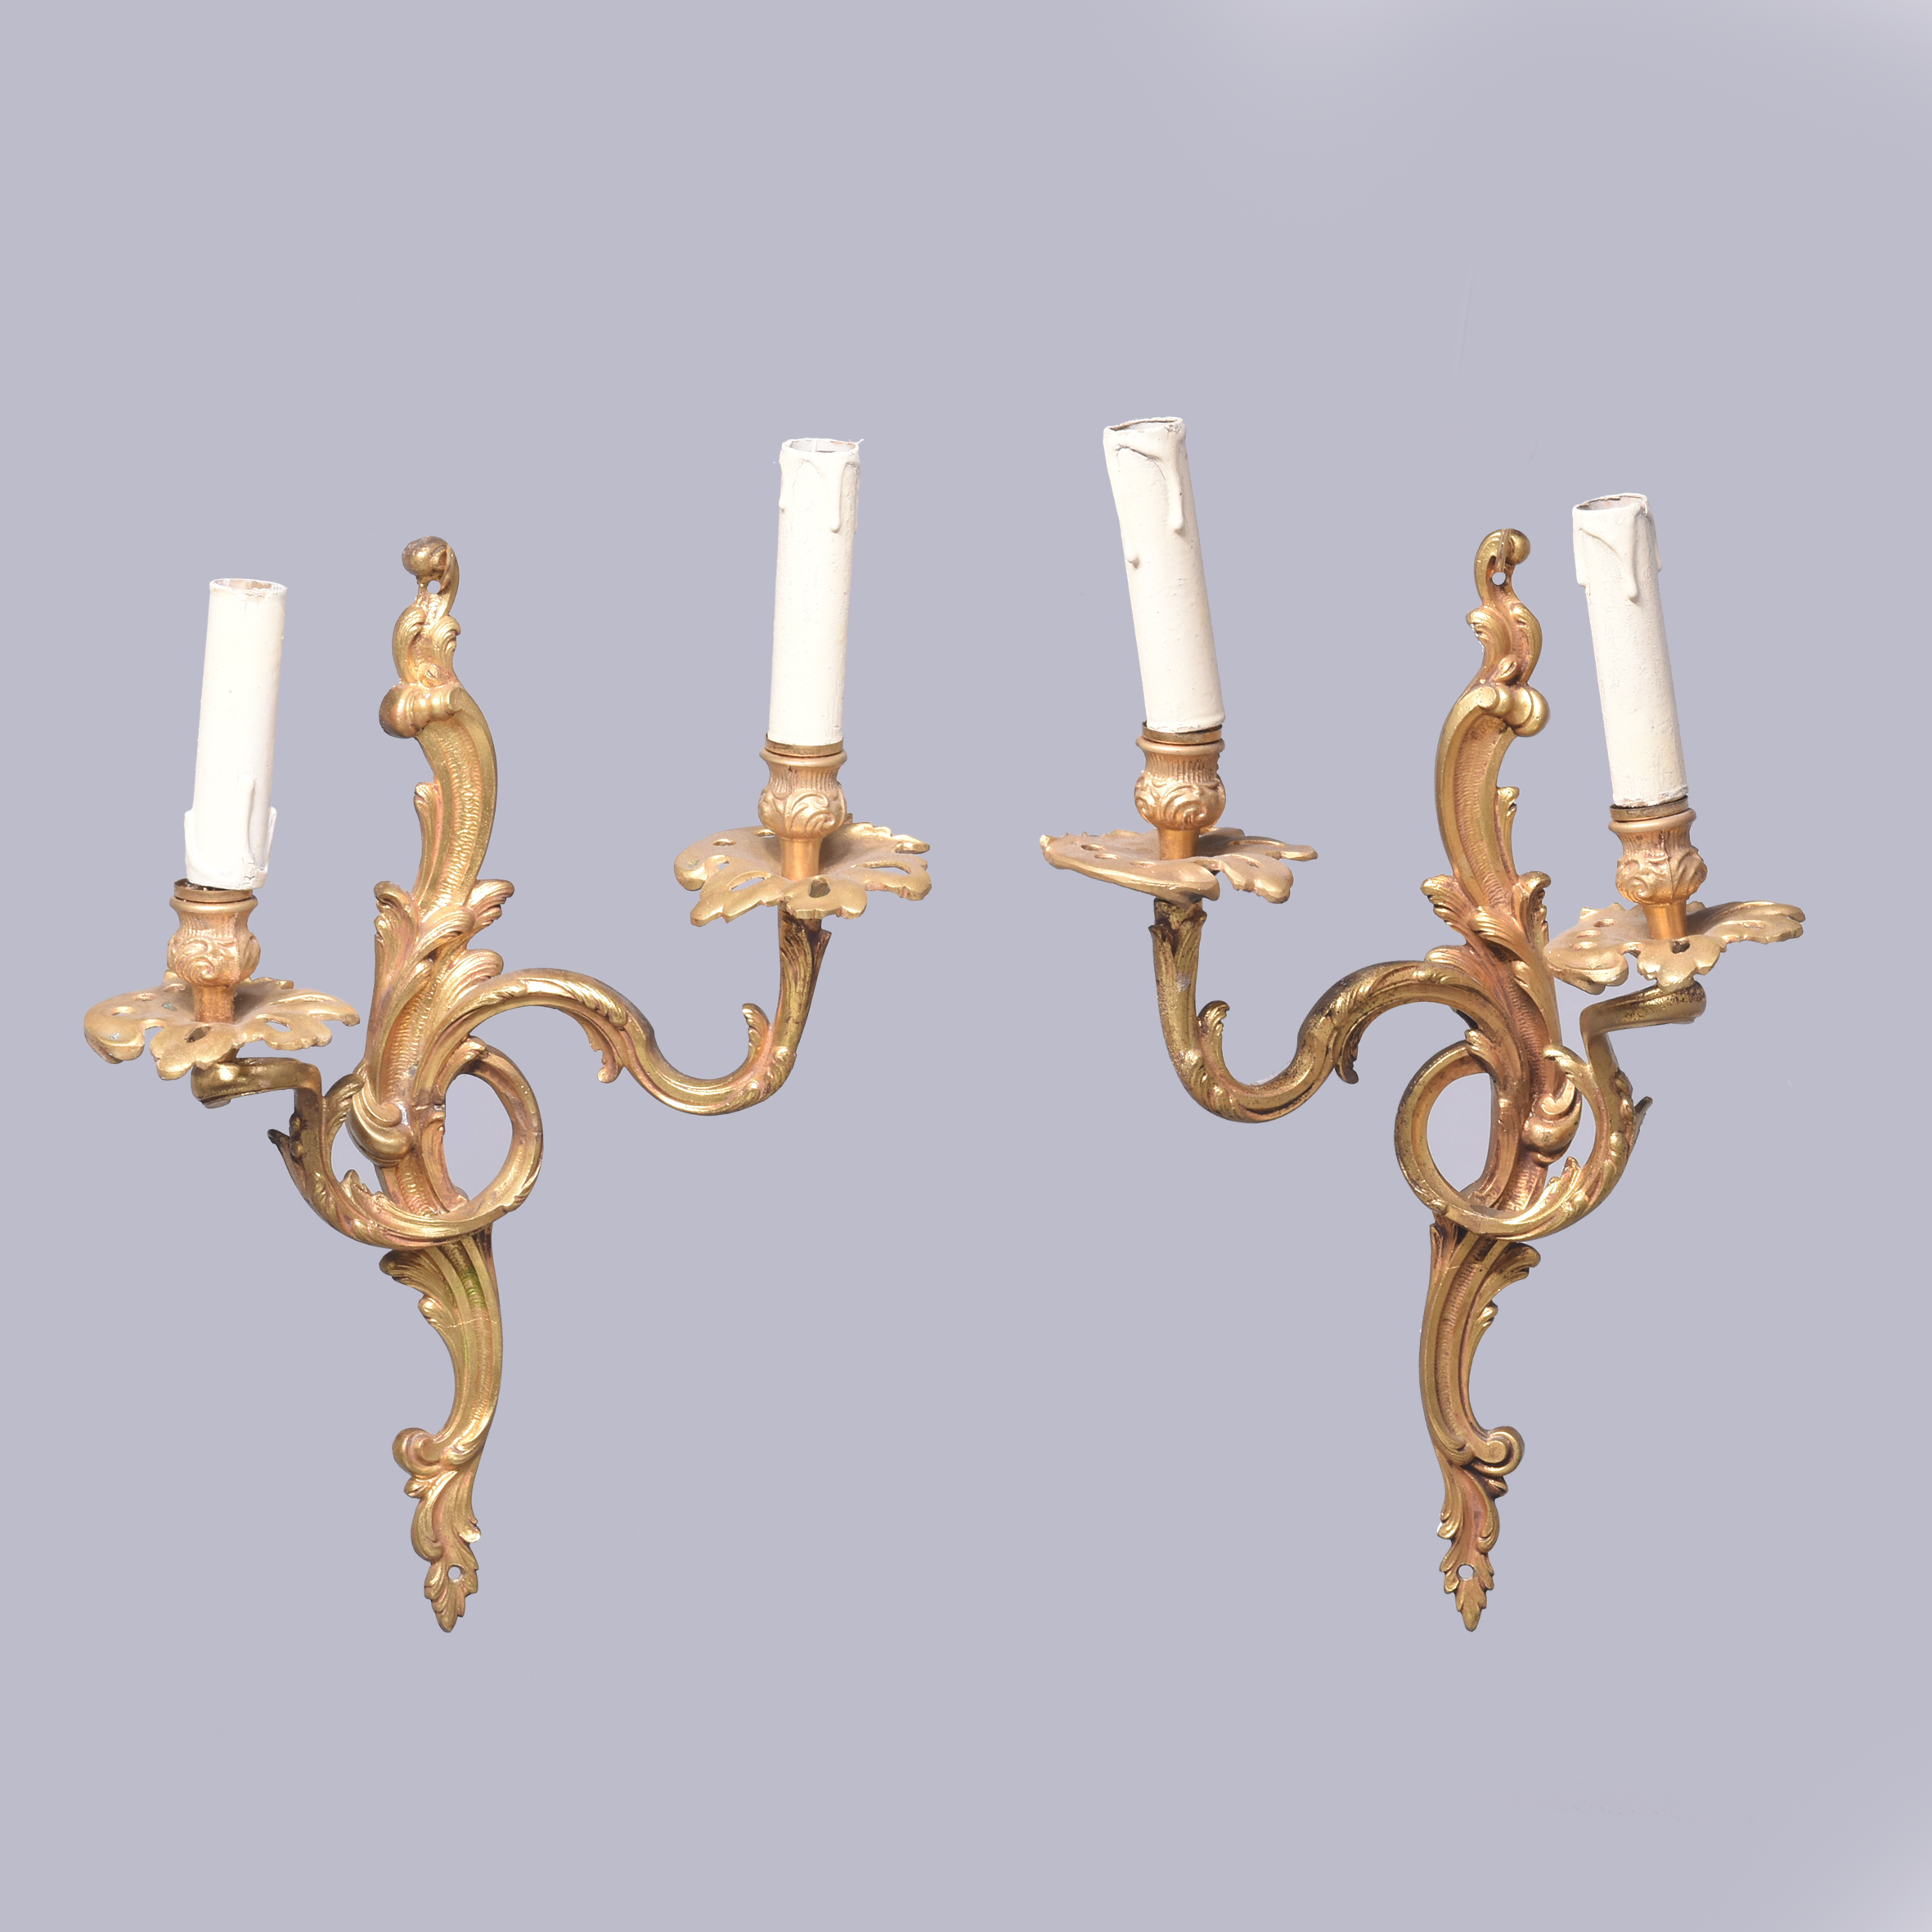 Pair of Gilded Wall Sconces wall sconce Antique Lighting